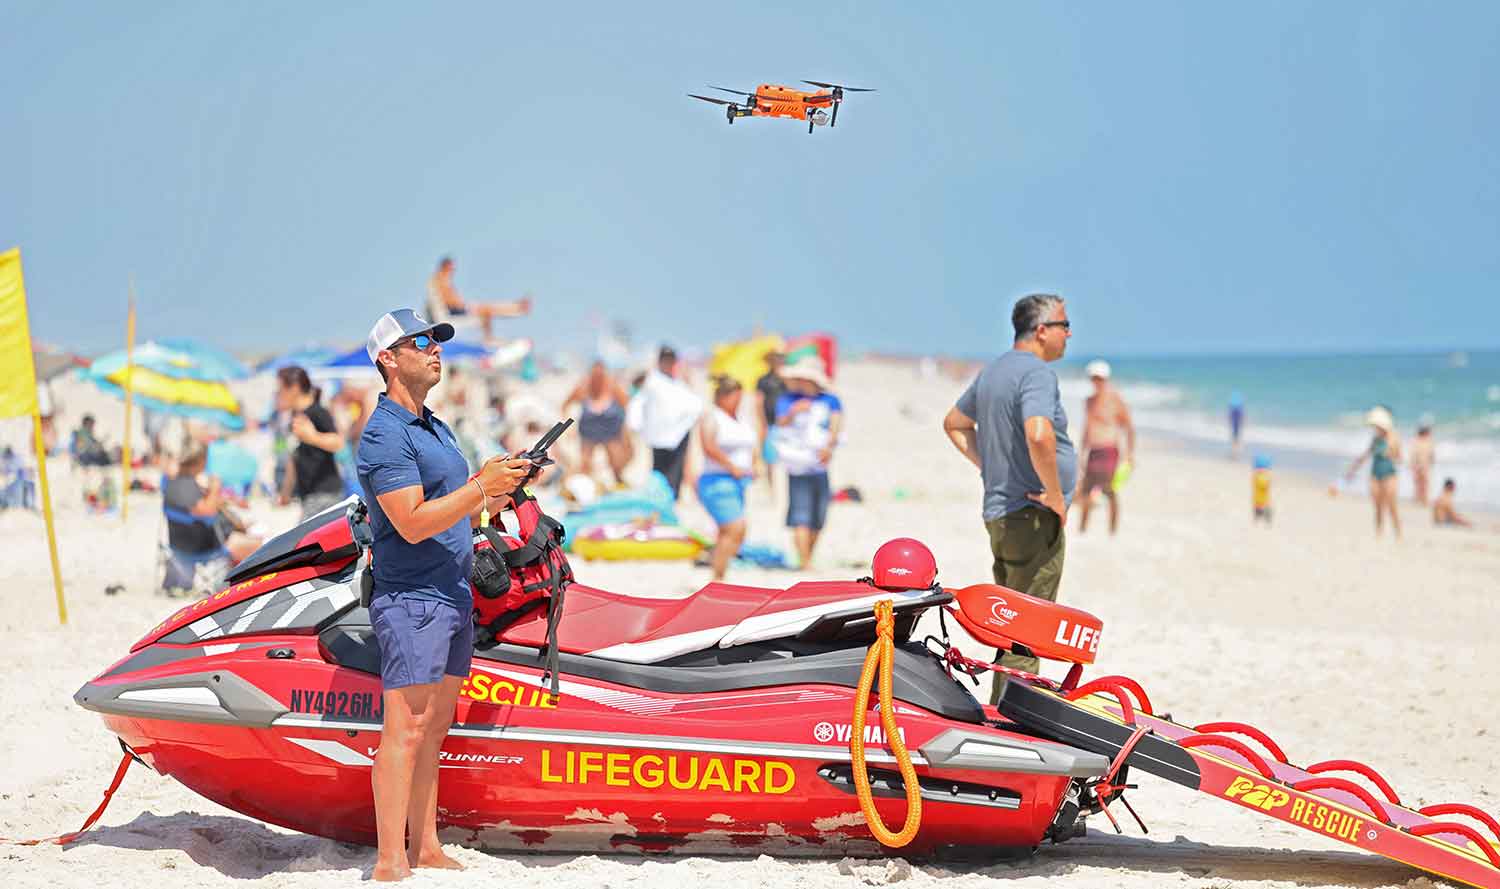 A man on a beach stands in front of a red jet ski that says Lifeguard as he operates a drone that is flying nearby.